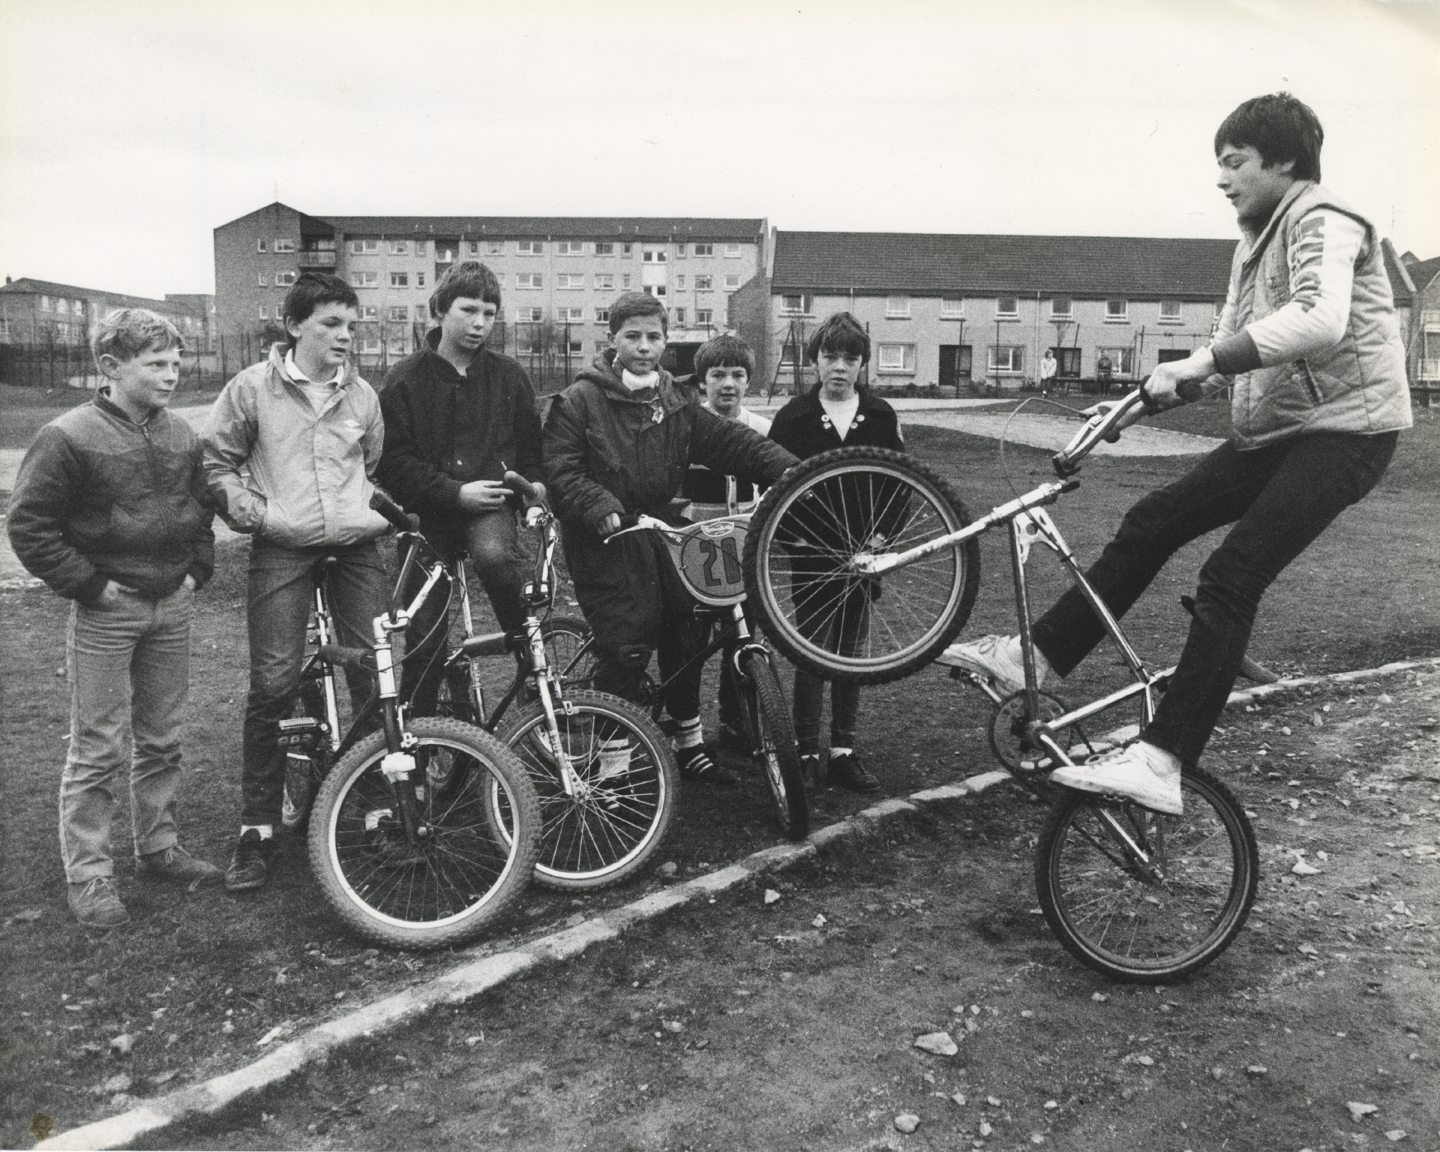 Fifteen-year-old Wayne Christie shows his mates his latest trick on the BMX bike at the Tillydrone track in 1983.